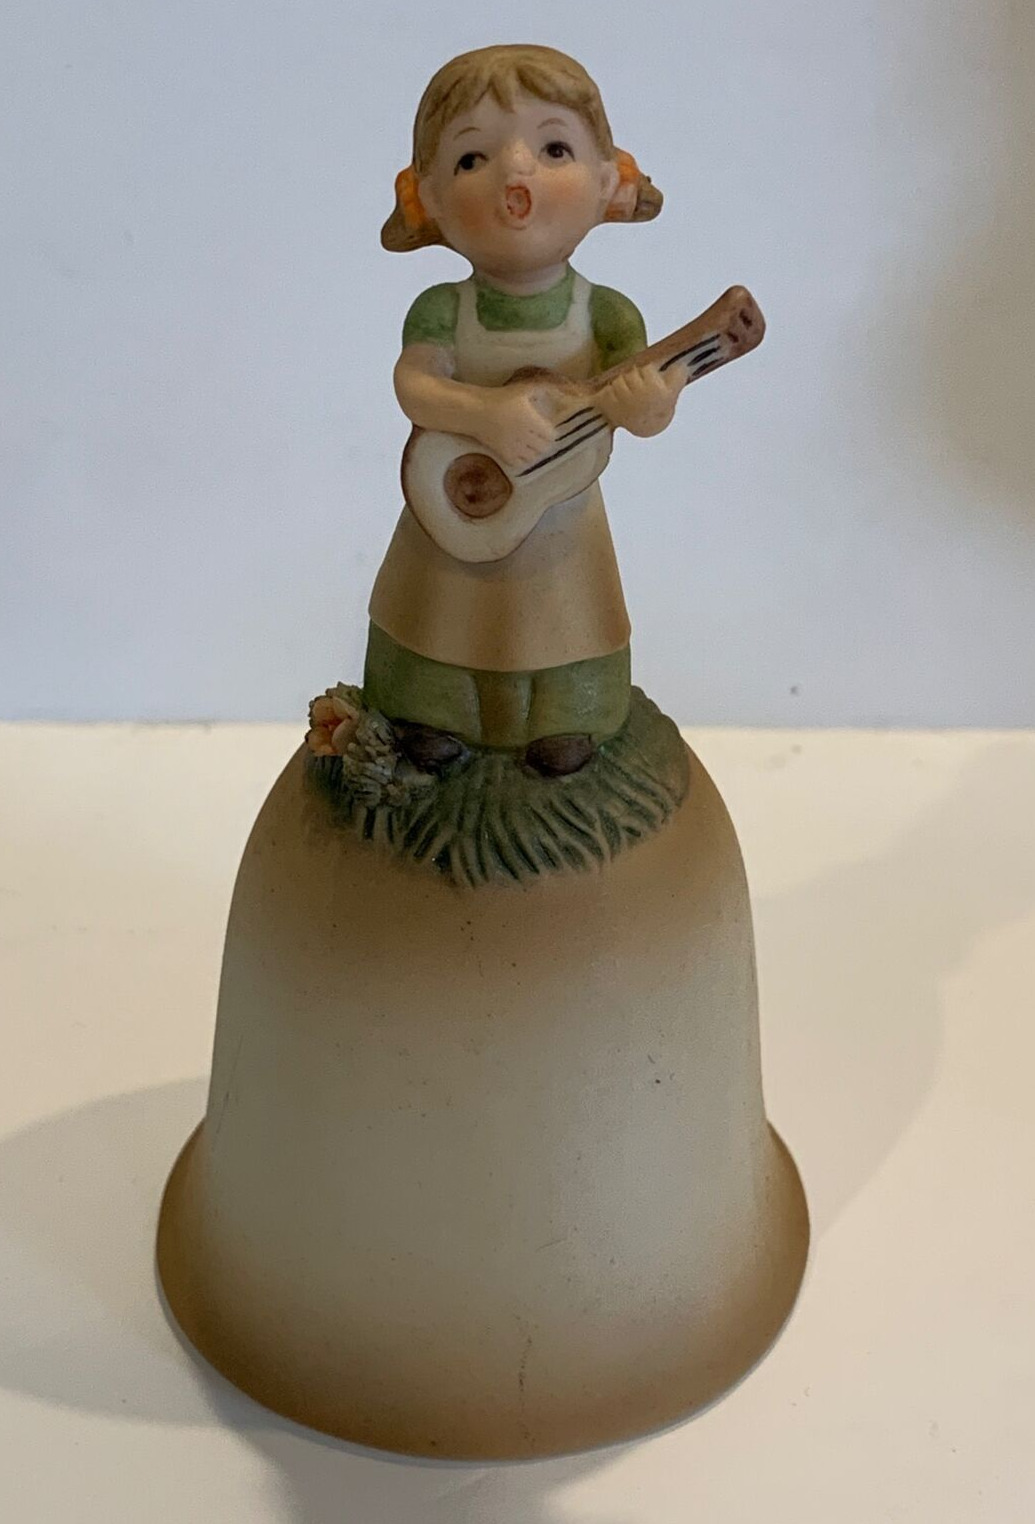 Vintage Napcoware Girl Guitar Bell - Taiwan - 5” - Hand Decorated